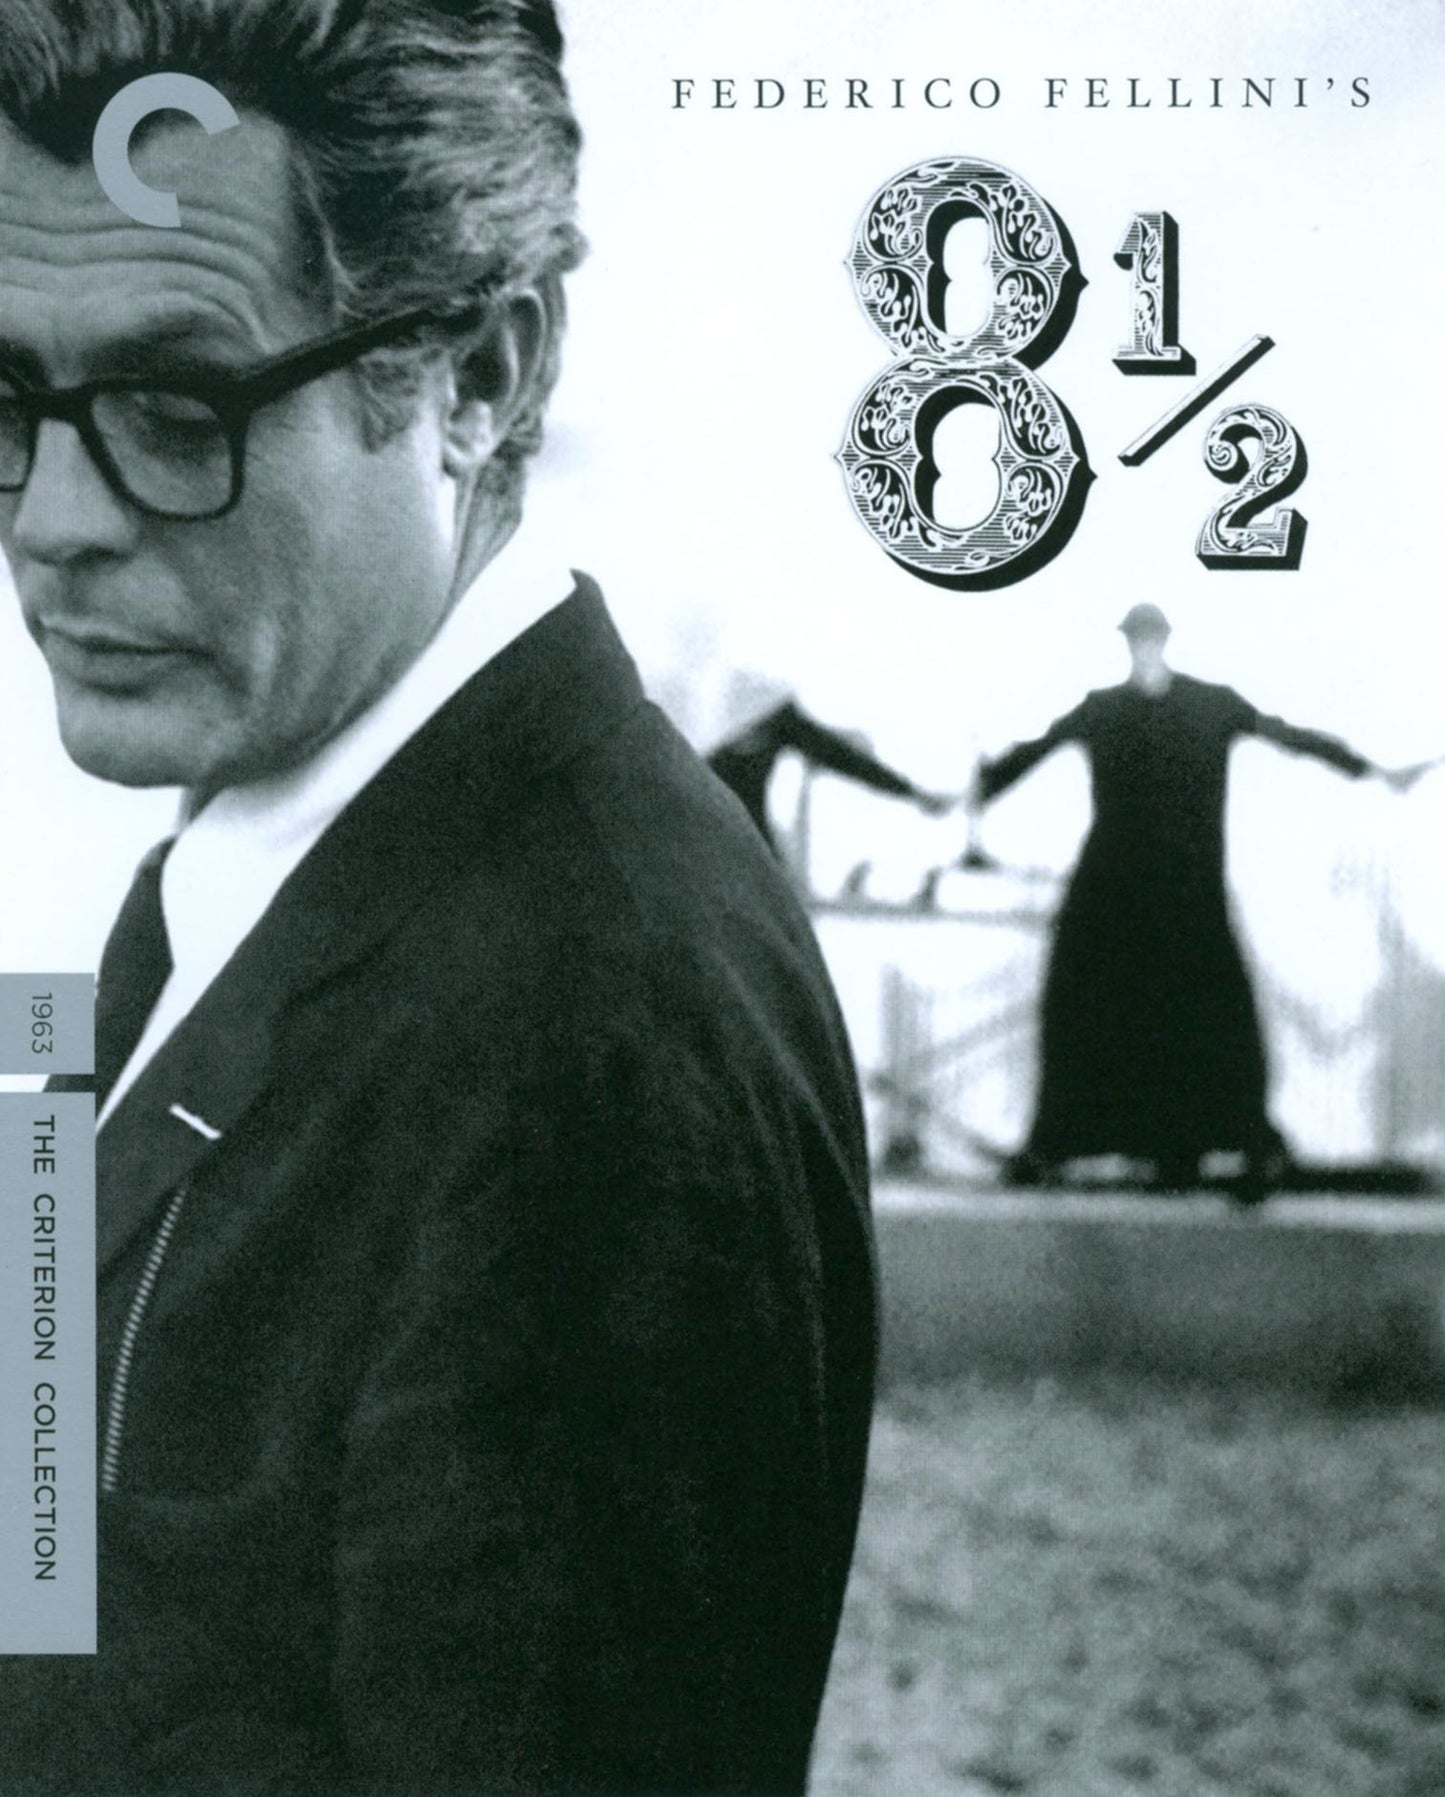 8 1/2 [Criterion Collection] [Blu-ray] cover art